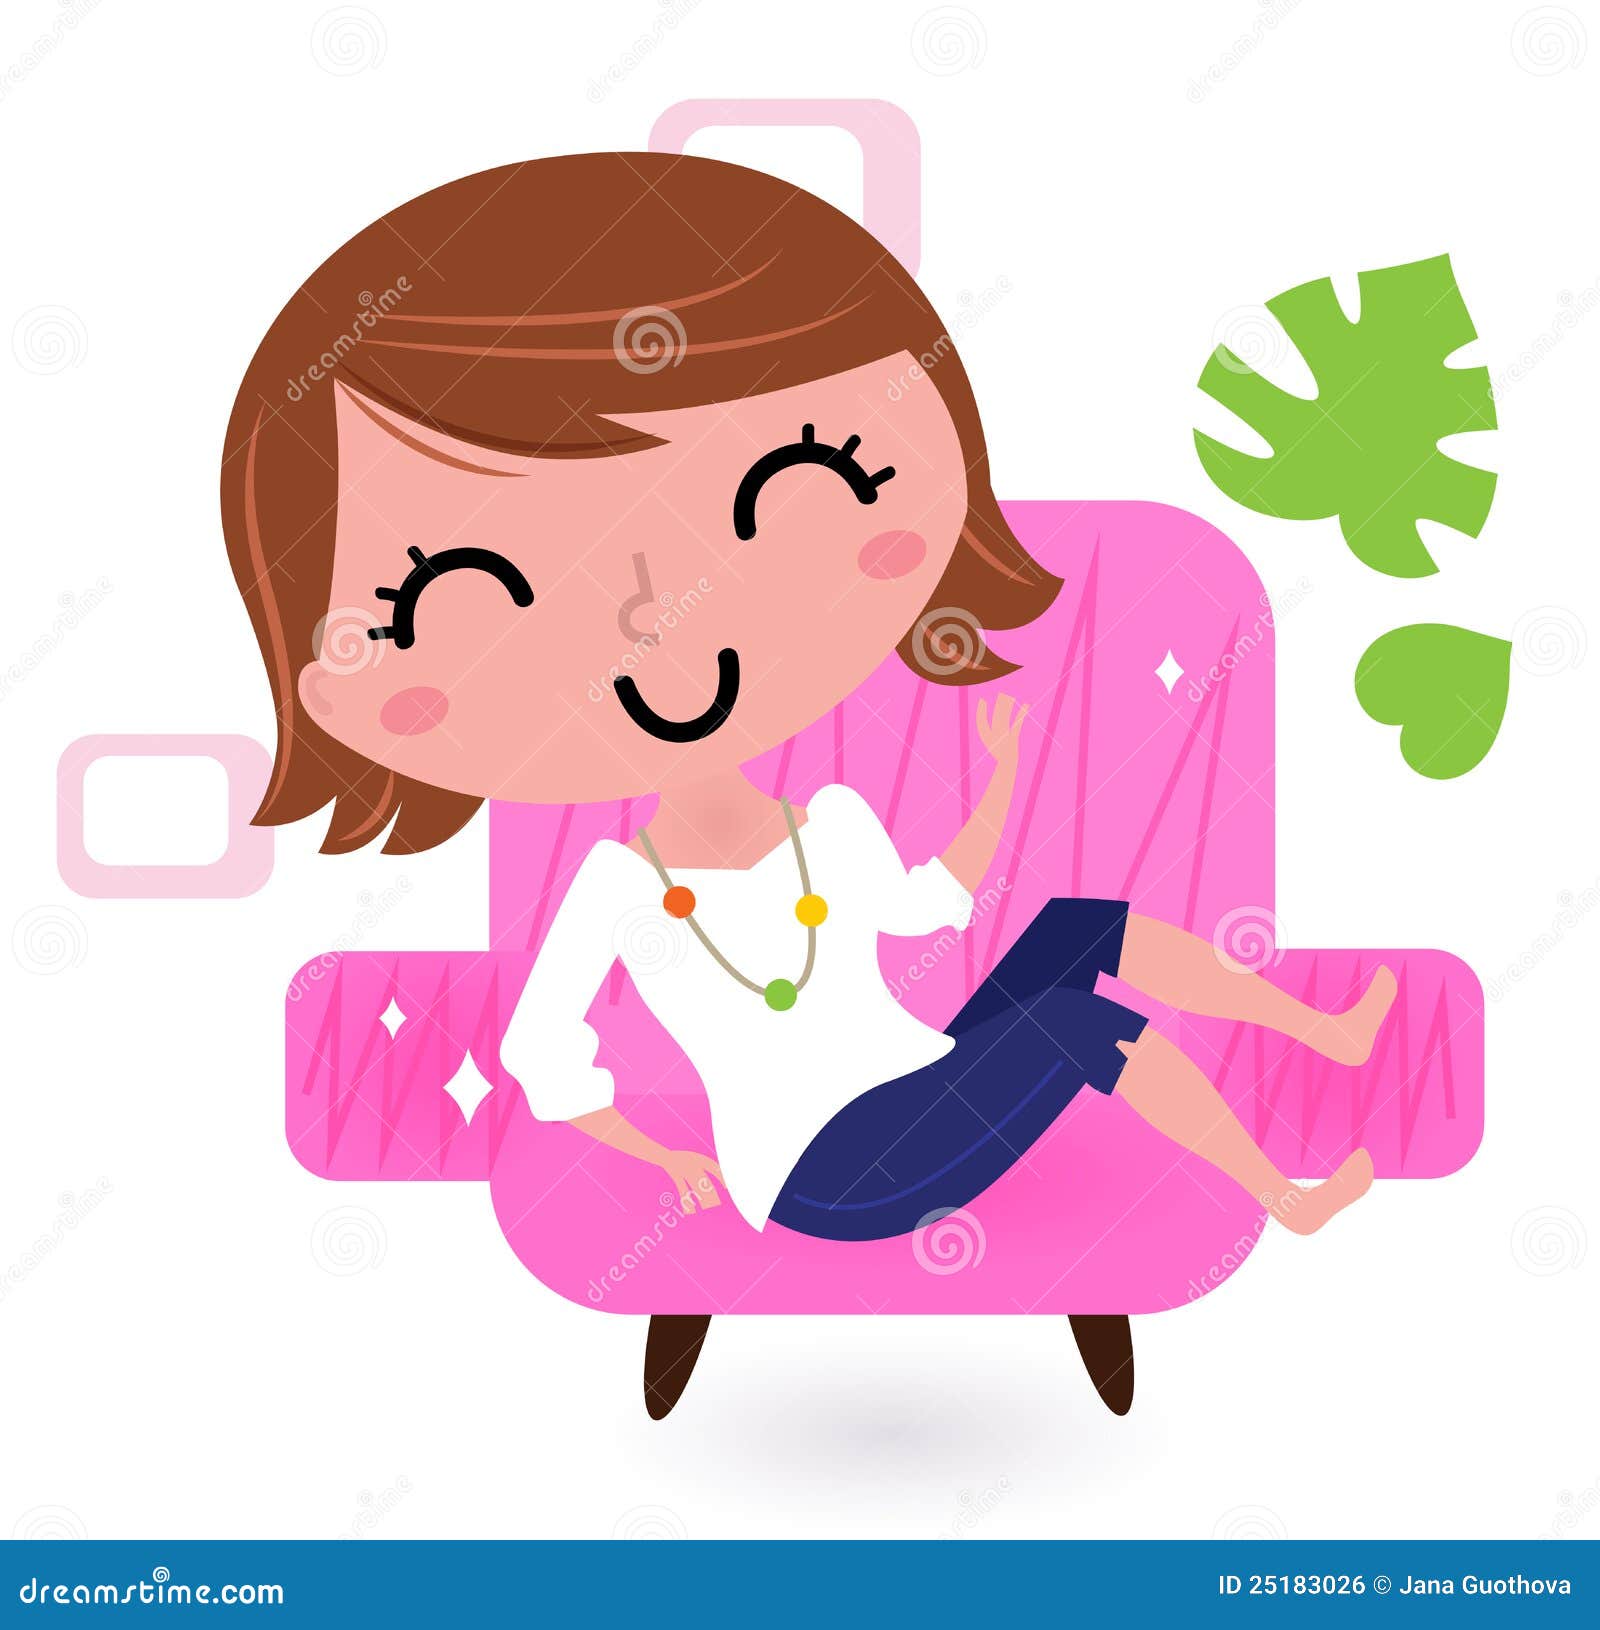 relaxation clipart images - photo #14